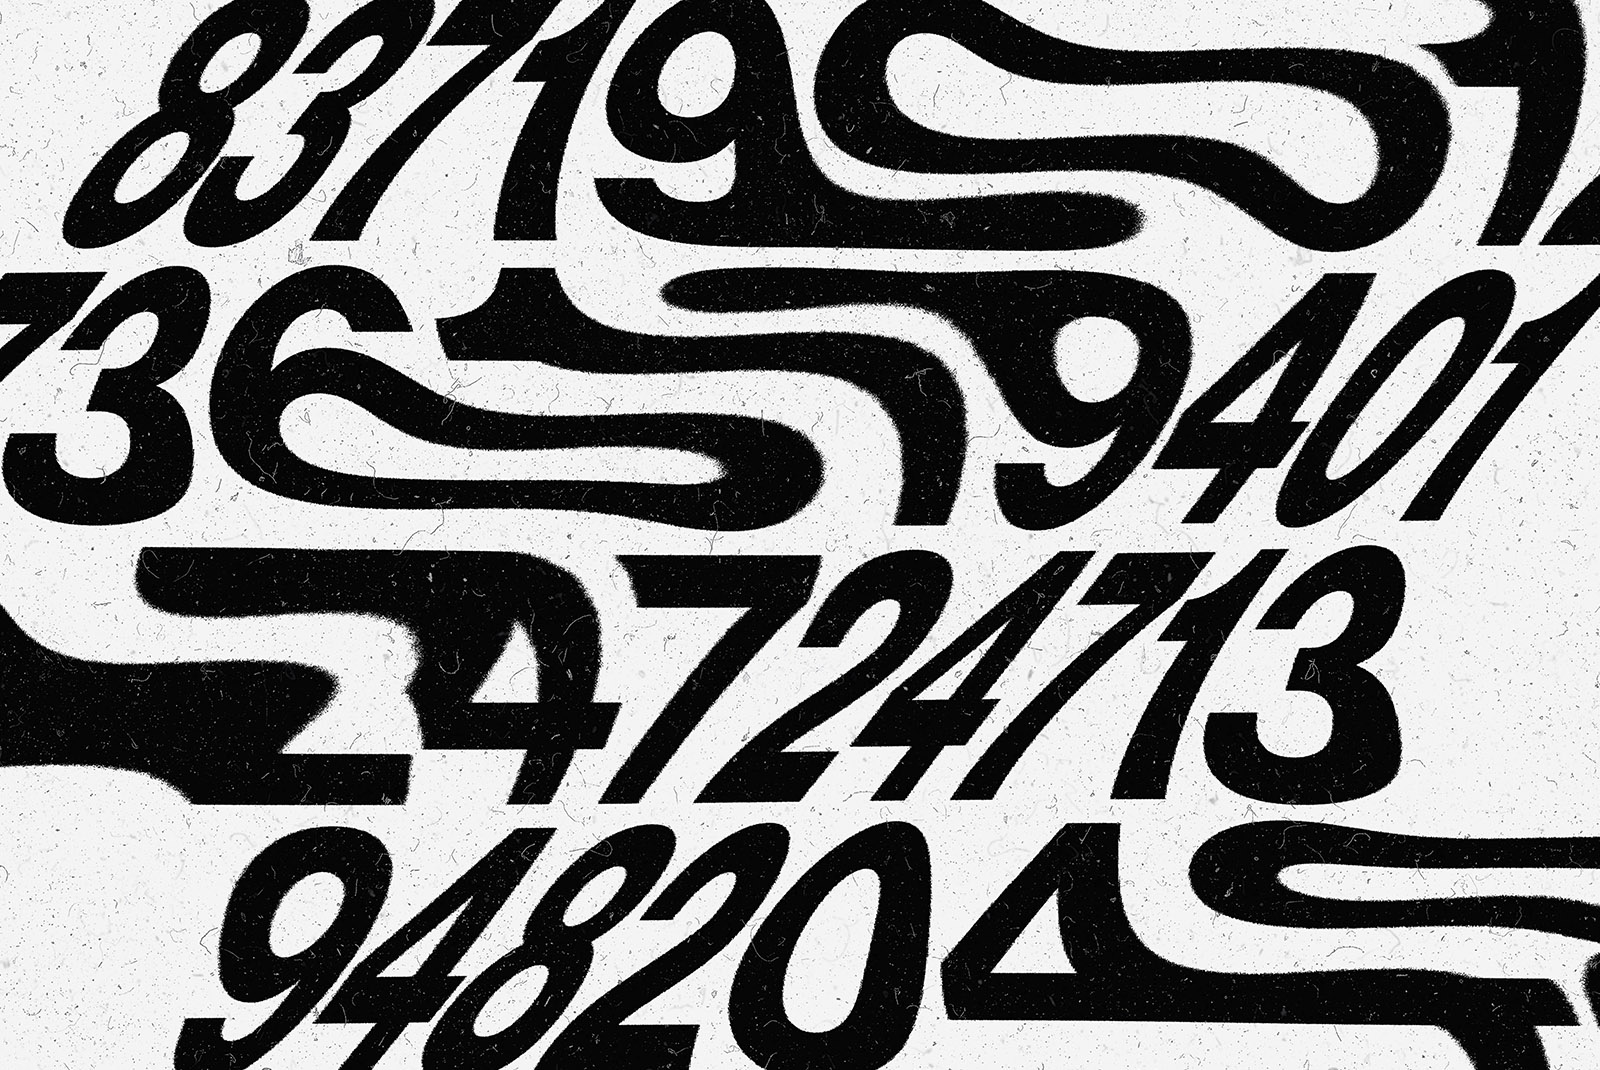 Dynamic black and white distorted number font design, ideal for bold graphic projects, modern typography mockup for designer portfolio.